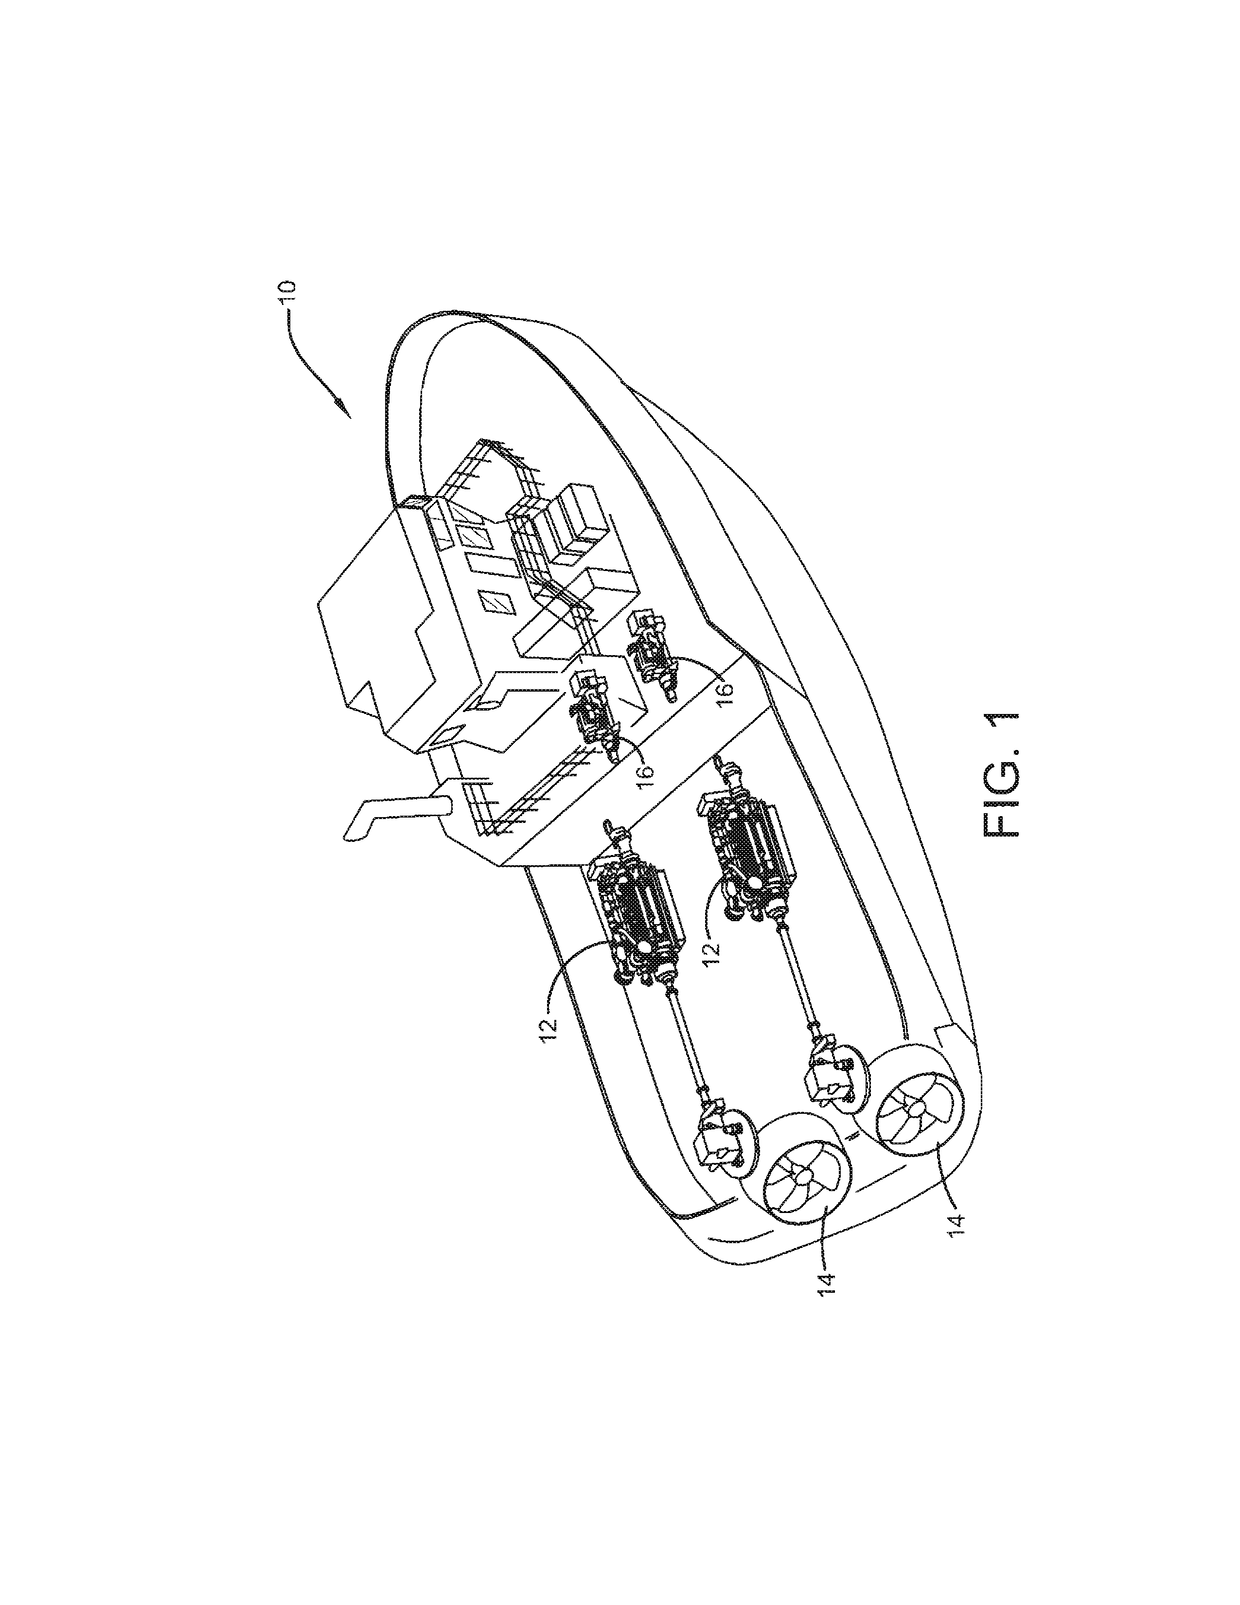 Clutch assembly and system